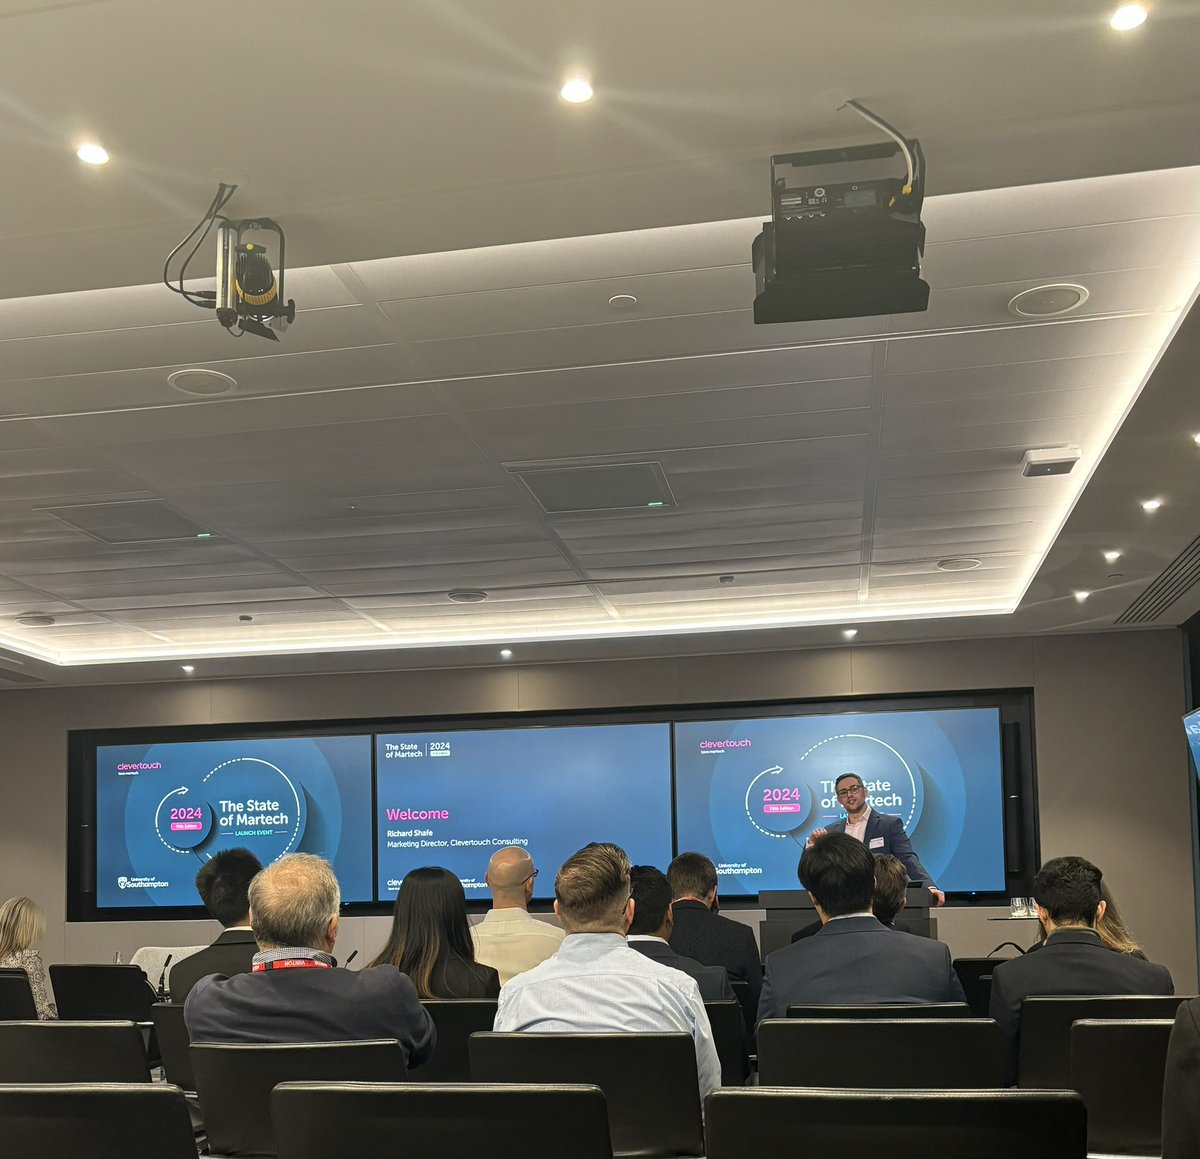 Kicking off the @Clevertouch Consulting State of Martech 2024 launch event at @LSEGplc. Looking forward to an engaging session! #SoM2024